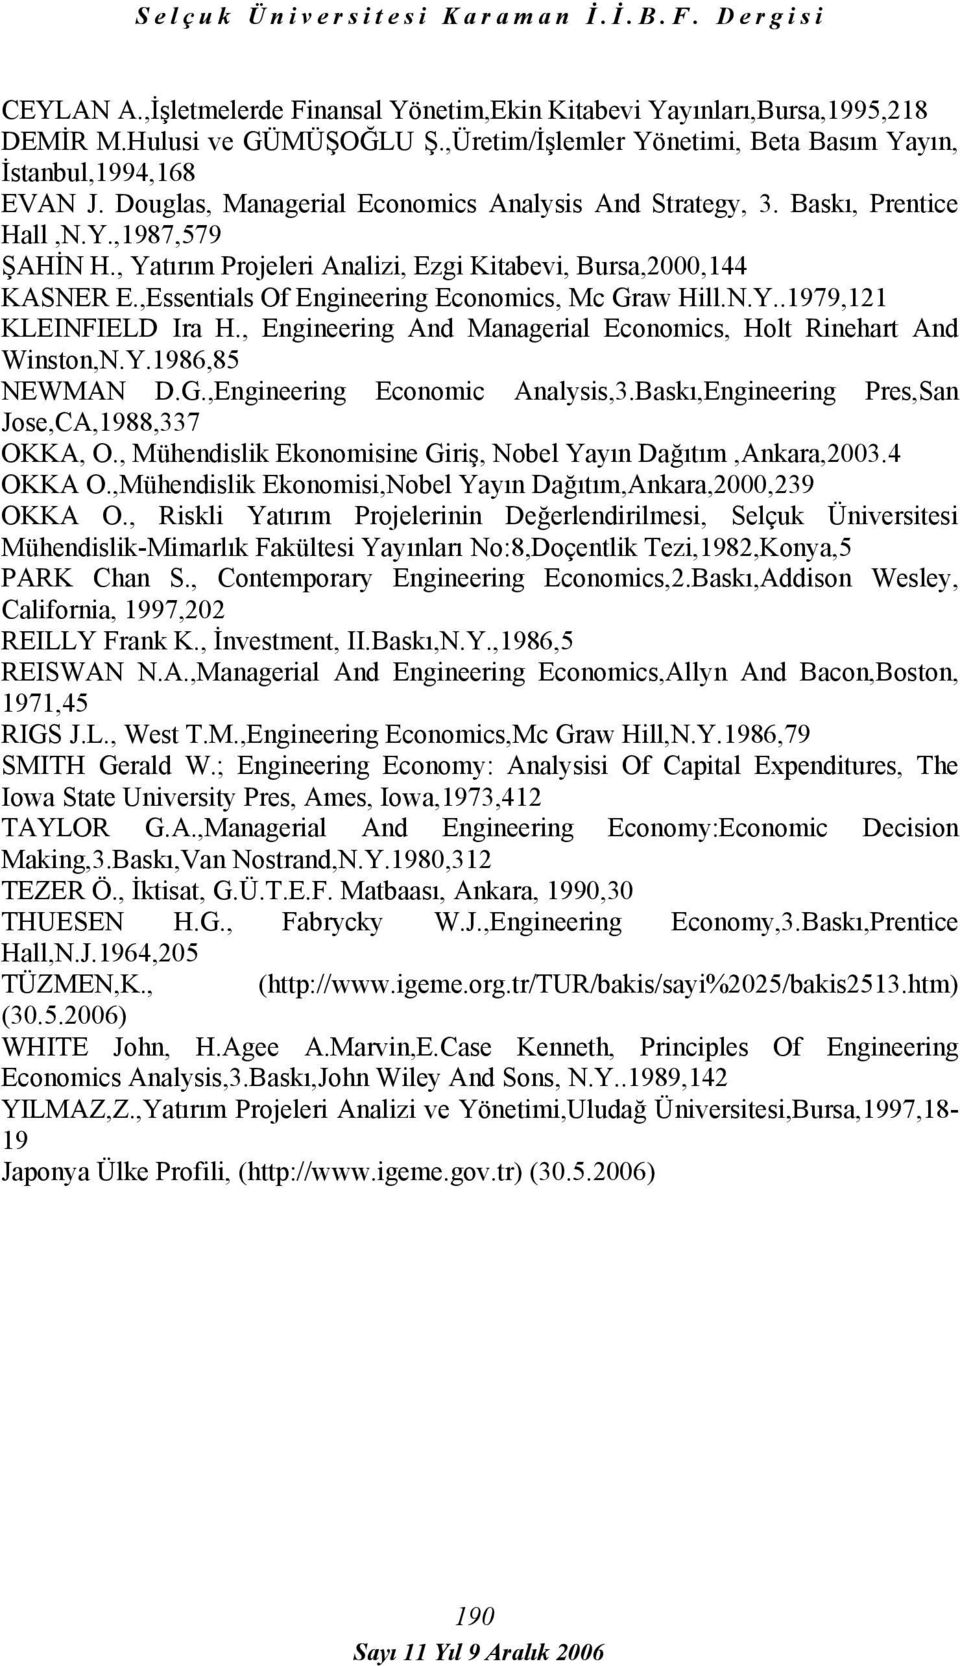 ,Essentials Of Engineering Economics, Mc Graw Hill.N.Y..1979,121 KLEINFIELD Ira H., Engineering And Managerial Economics, Holt Rinehart And Winston,N.Y.1986,85 NEWMAN D.G.,Engineering Economic Analysis,3.